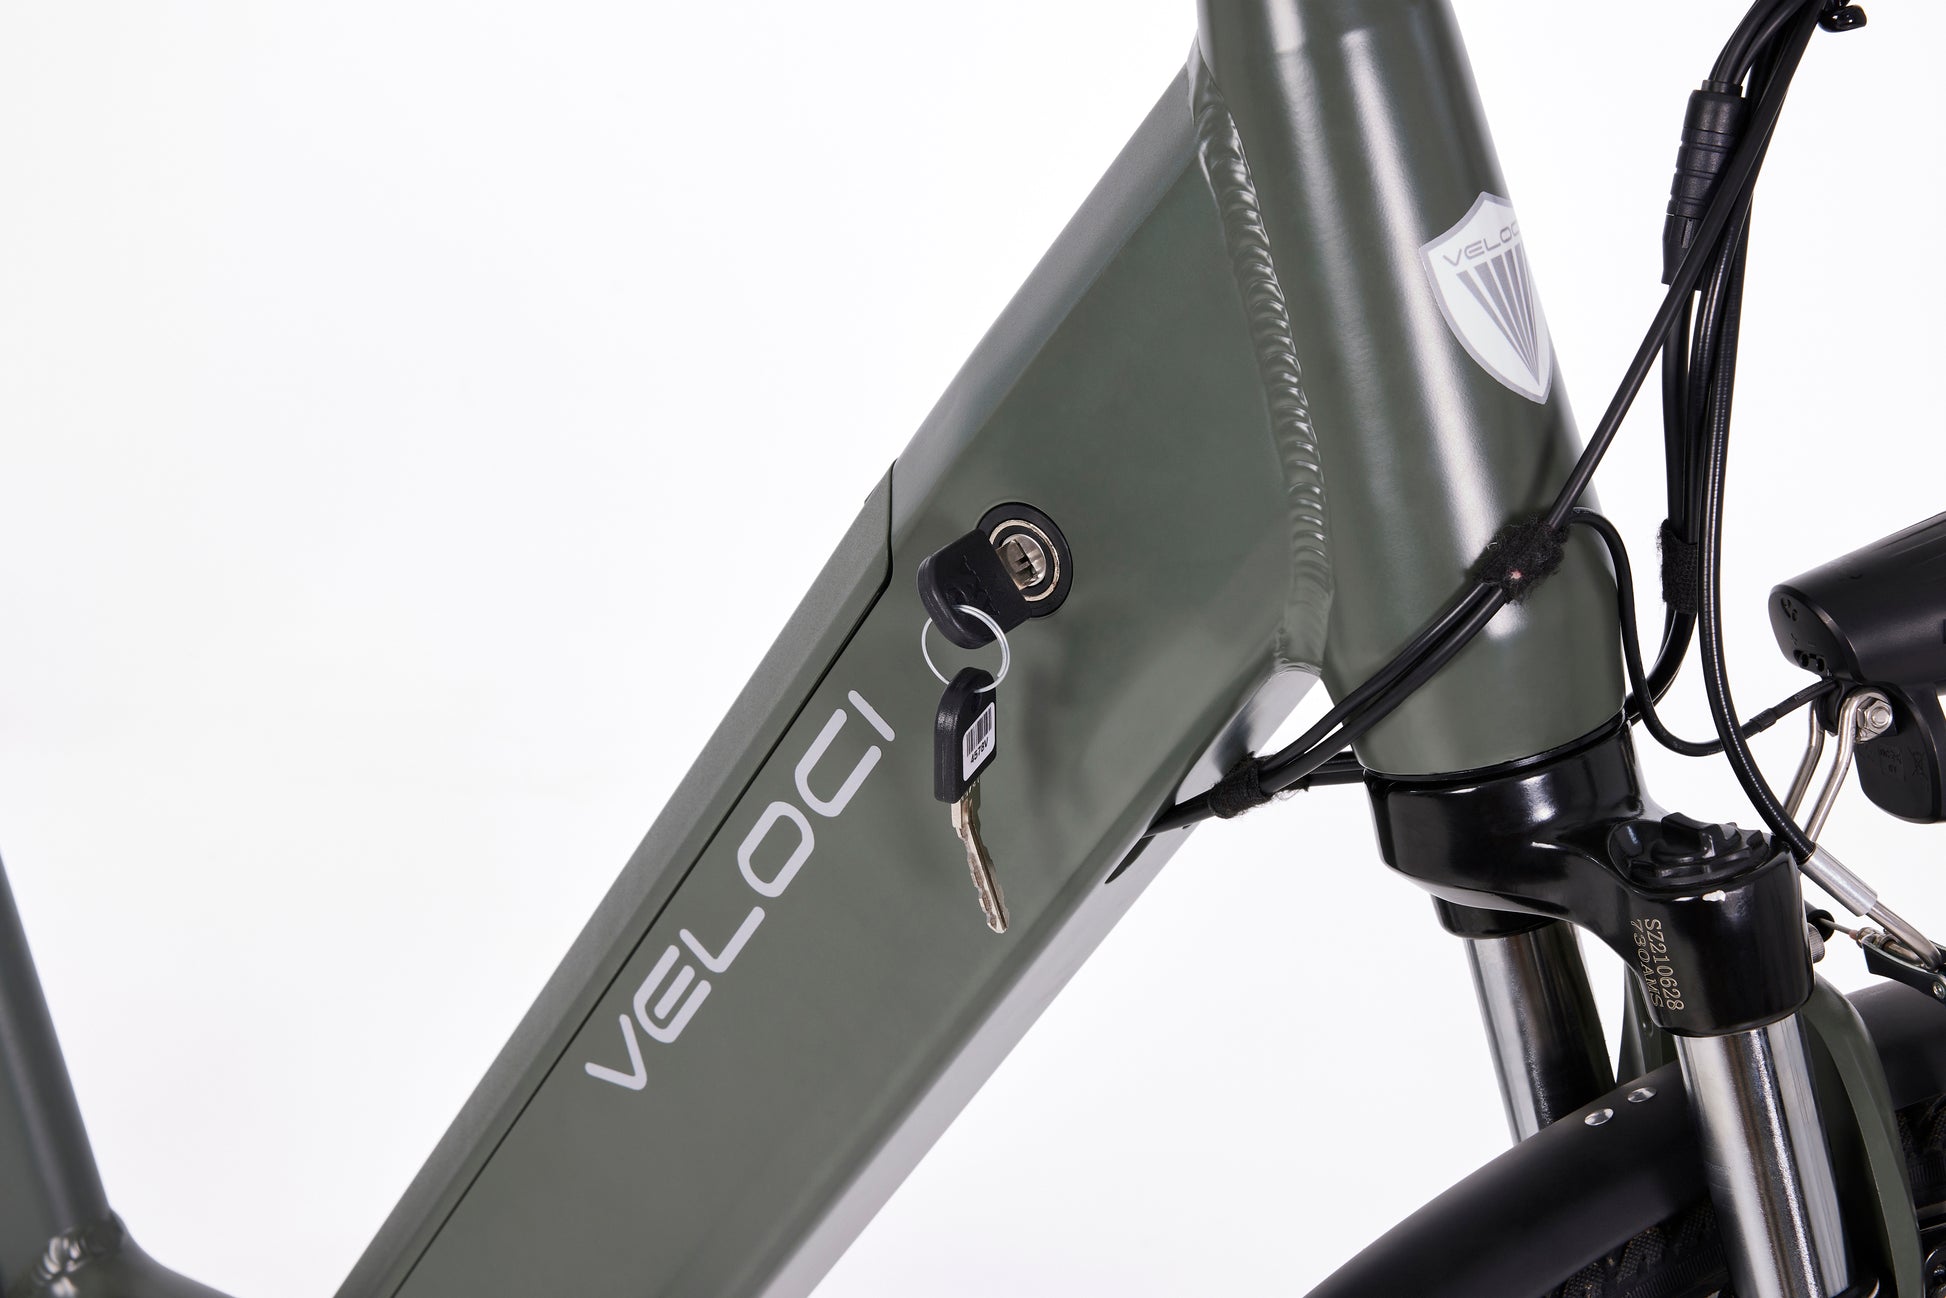 Veloci electric bike available for sale with integrated downtube battery. Veloci e-bike with batter in the downtube frame.